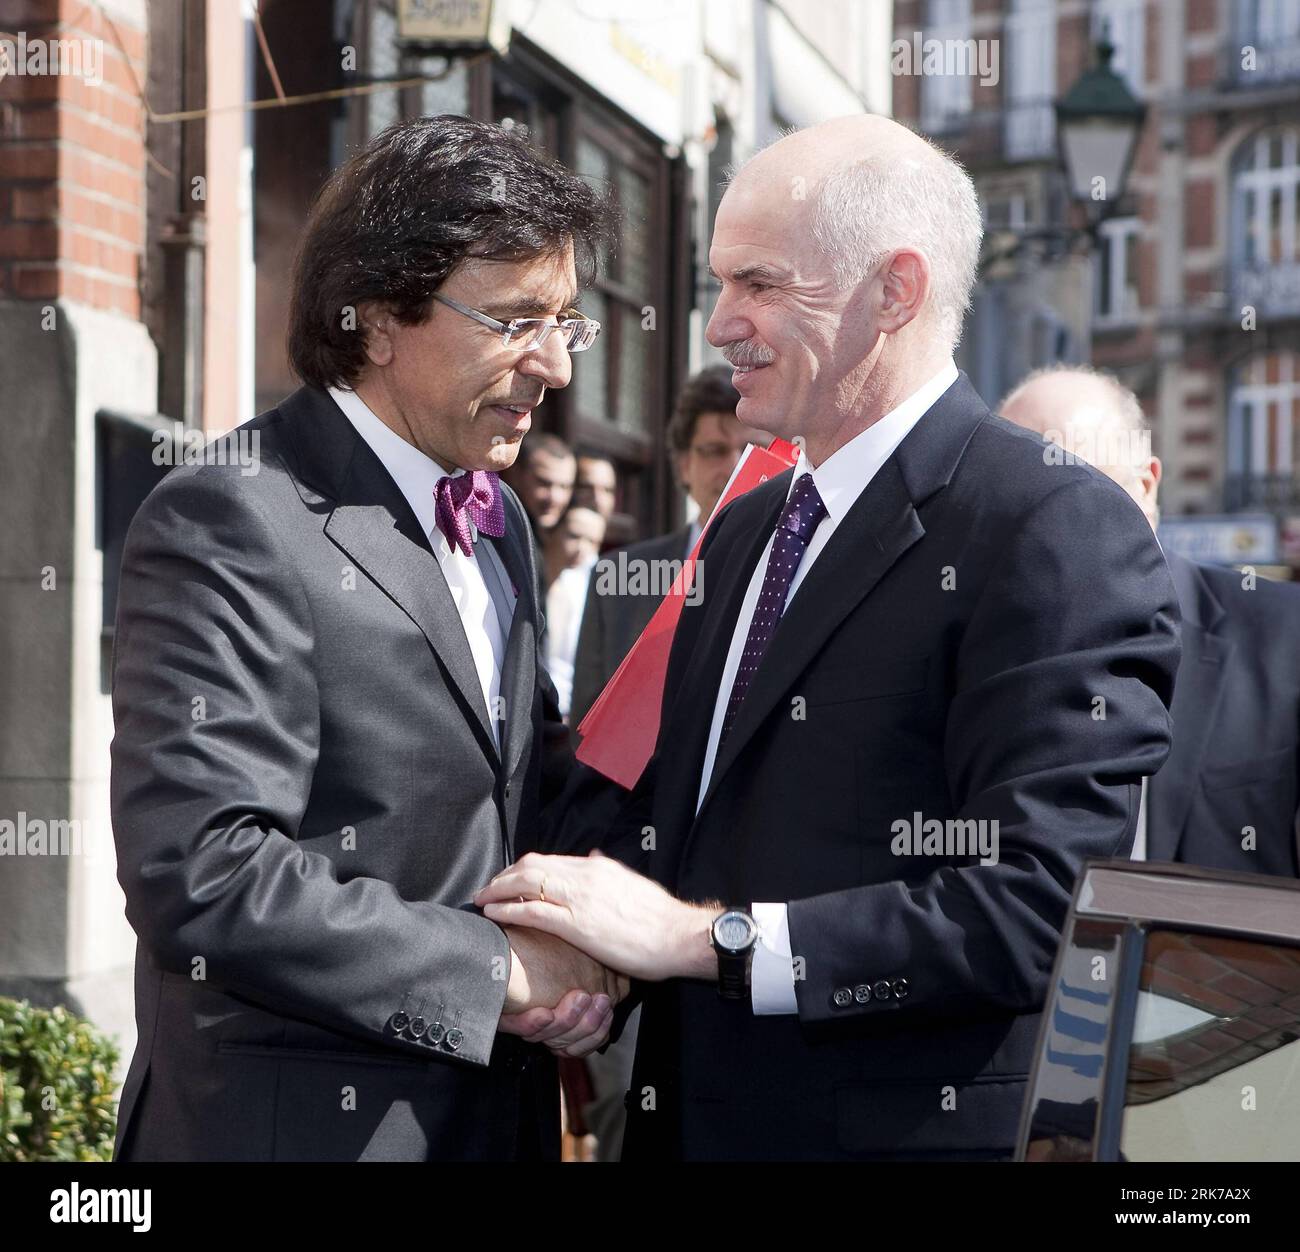 Bildnummer: 53891096  Datum: 25.03.2010  Copyright: imago/Xinhua (100325) -- BRUSSELS, March 25, 2010 -- Greek Prime Minister George Papandreou (R) shakes hands with Belgian Socialist Party chairman Elio Di Rupo at a Socialist Party Group (PSE) meeting prior to the European summit in Brussels, capital of Belgium, March 25, 2010. Papandreou on Thursday urged European Union leaders to stabilize the euro while the cash-strapped country determines to continue a program to cut its ballooning budget deficit. (Xinhua/Thierry Monasse) (ypf) (1)EU-BRUSSELS-SUMMIT PUBLICATIONxNOTxINxCHN People Politik k Stock Photo